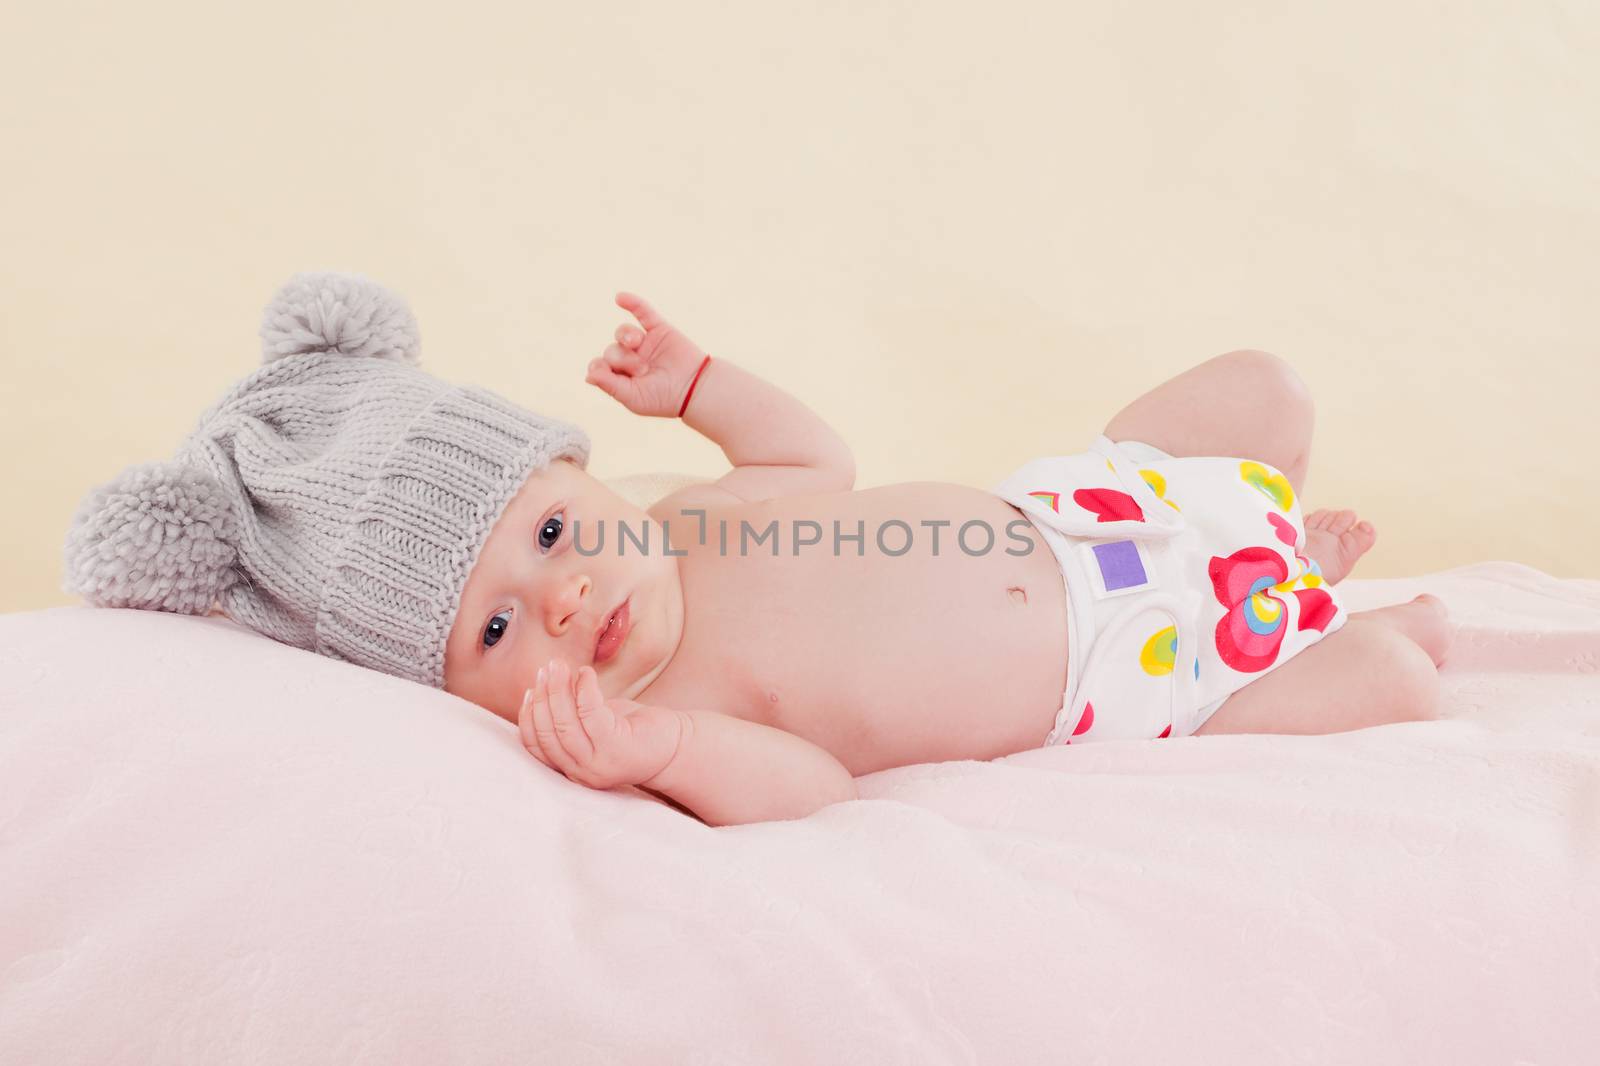 Cute baby girl with grey hat and diaper lying on blanket and looking into the camera. Beautiful newborn.